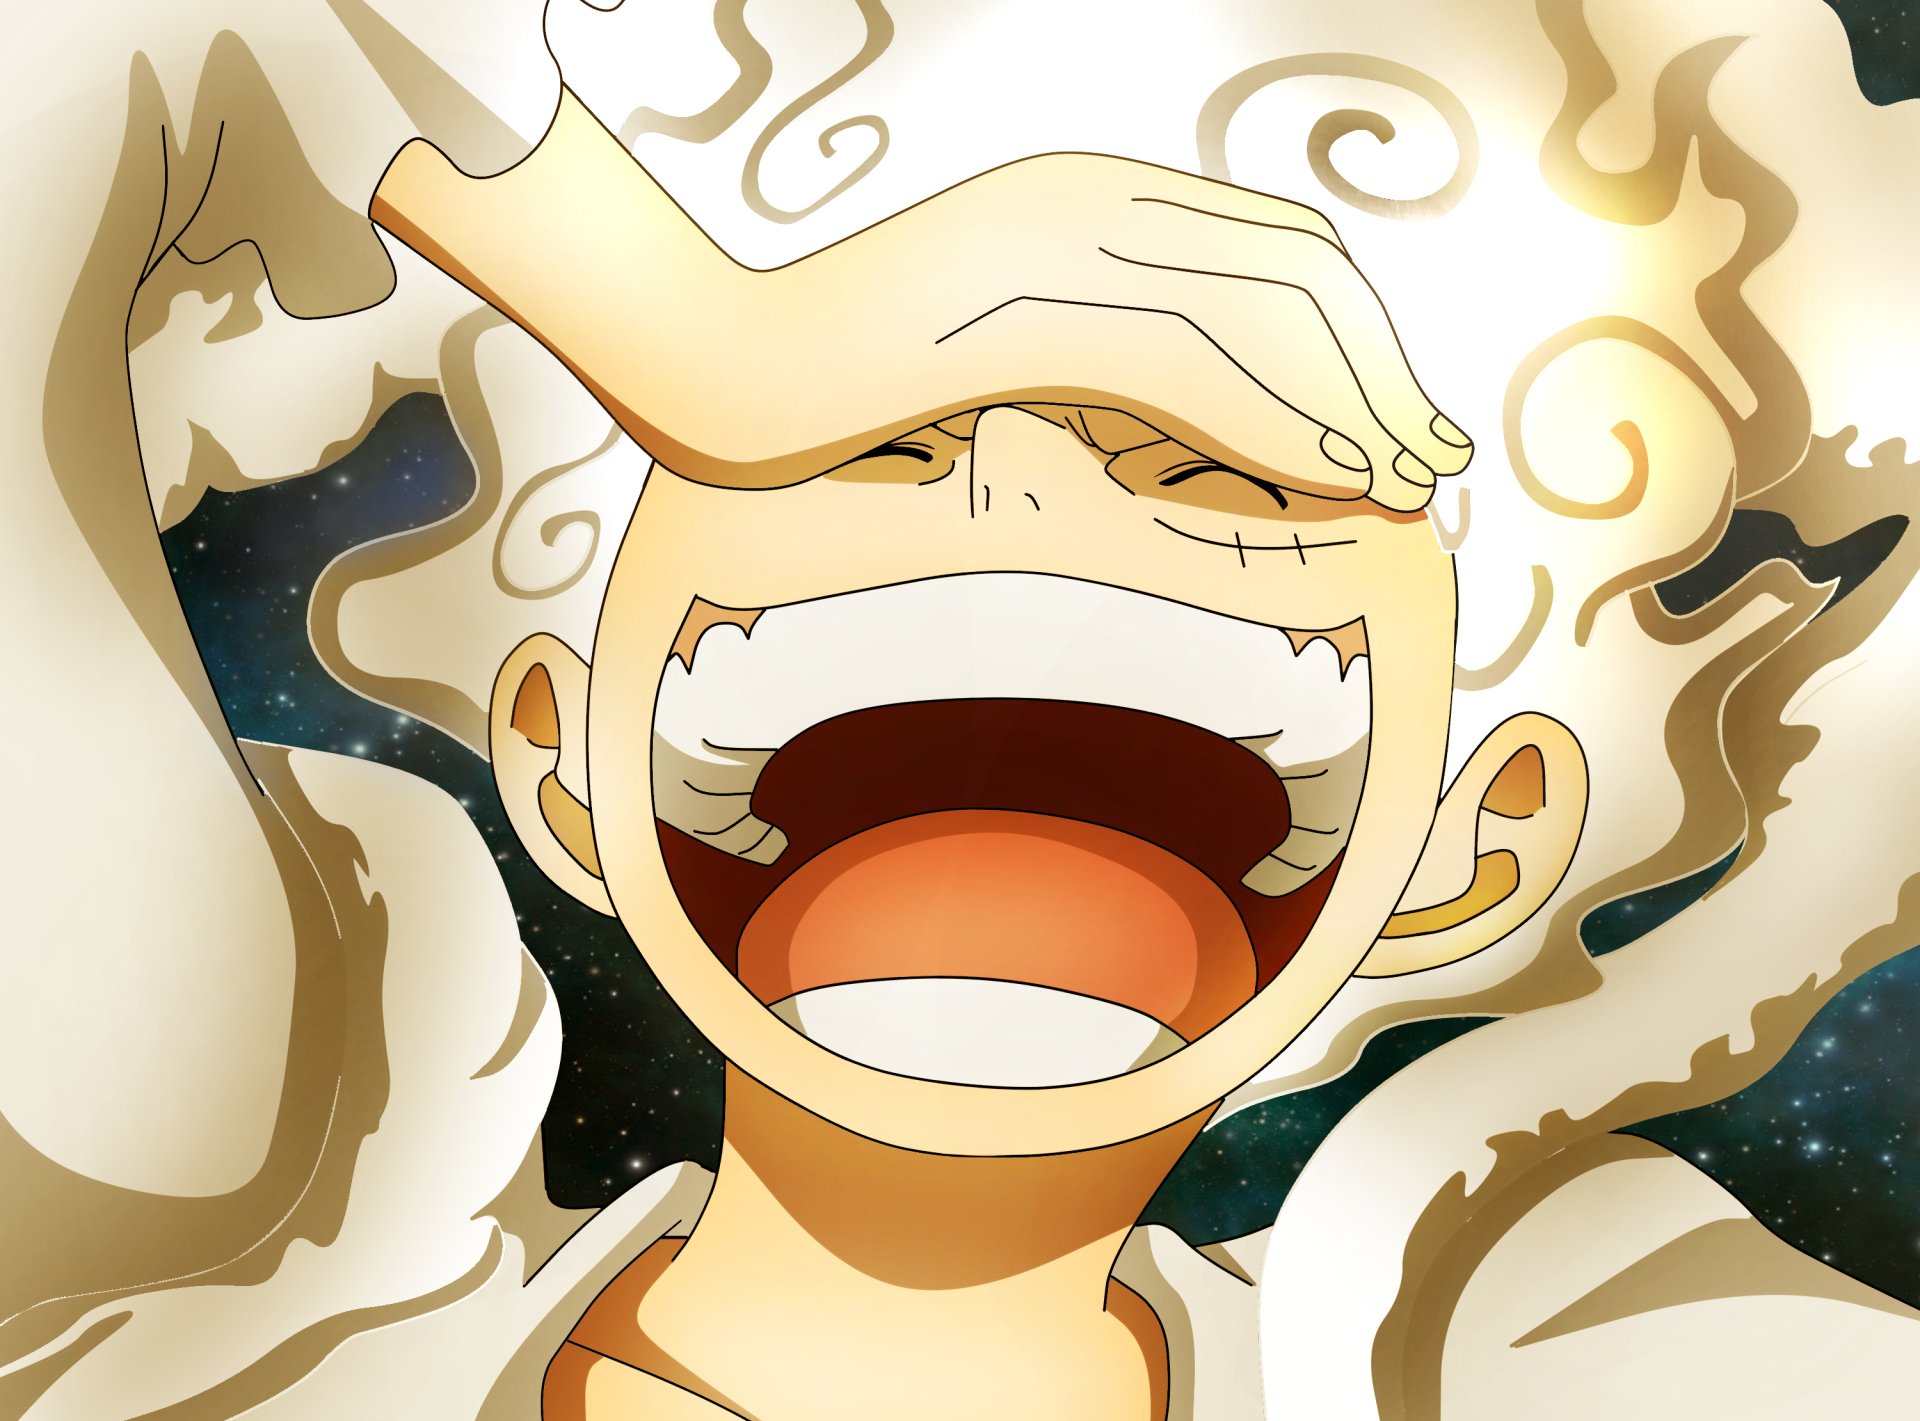 Anime One Piece HD Wallpaper by DT501061 余佳軒